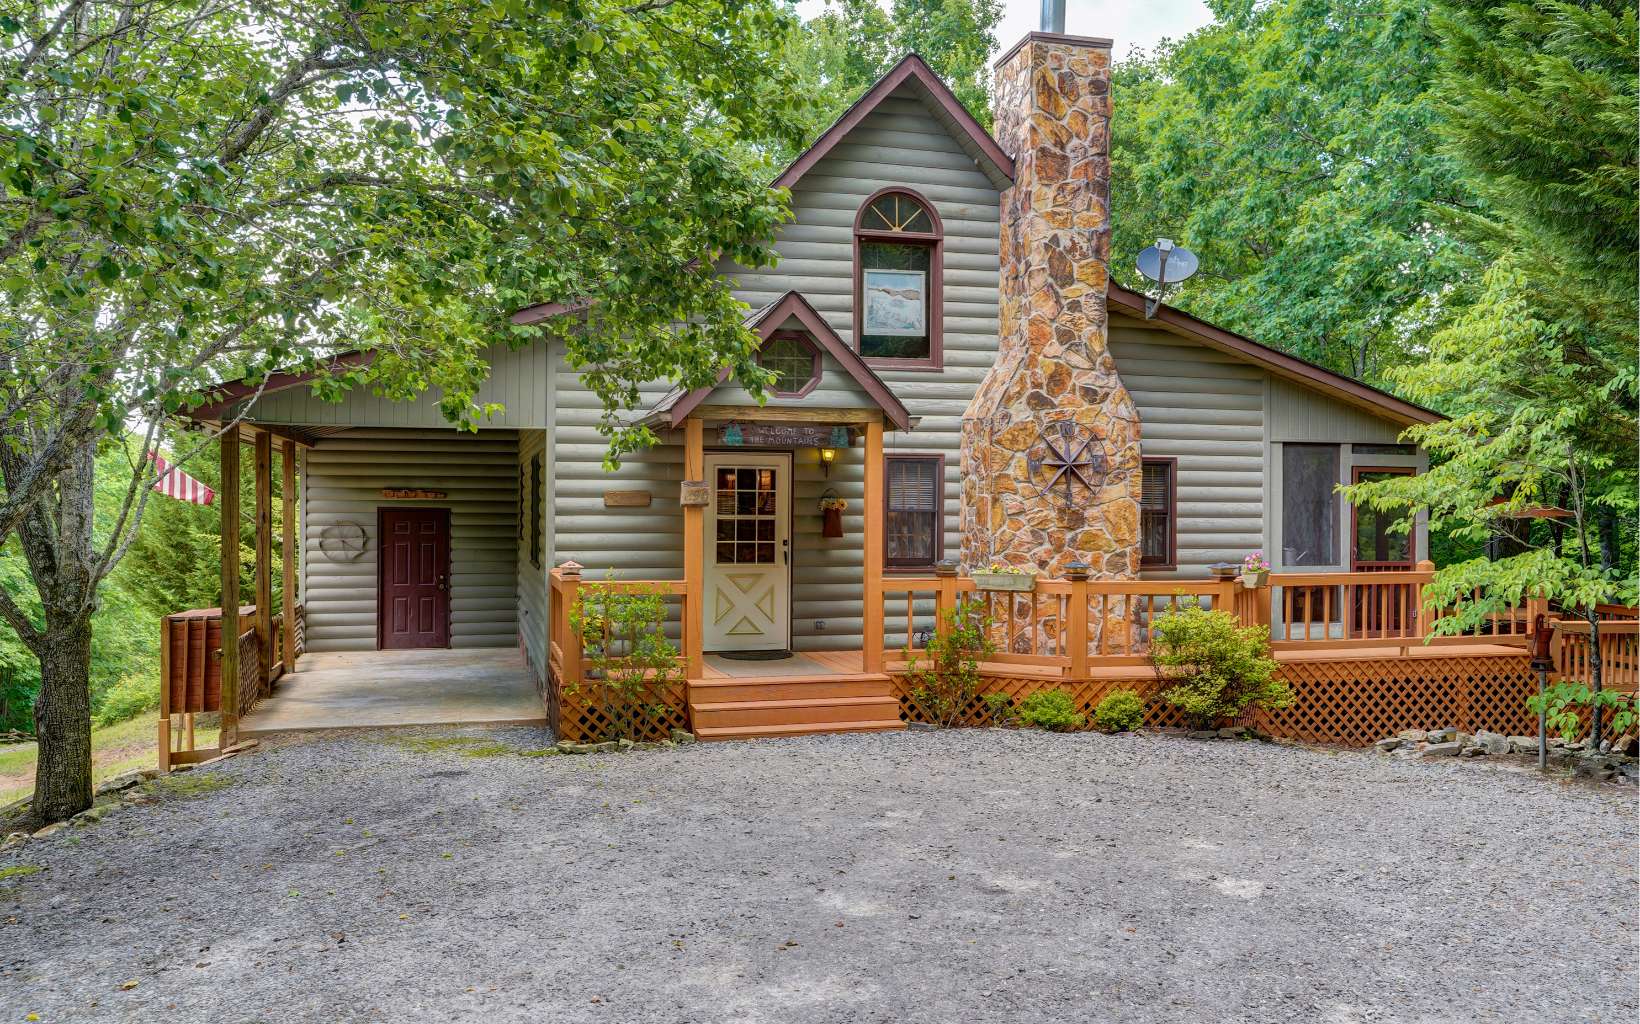 NEW PRICE on this ONE-OF-A-KIND cabin home with additional "TREEHOUSE" living space! This unique mountain home is nestled on 1.49 wooded acres with marked hiking trail to small creek. With 3 decks, screened porch, hot tub & fire pit area, it's an outdoor oasis of relaxation. Inside you're welcomed by a homey cabin feel with luxury amenities that include a jetted tub, large master suite, stone fireplace, hardwood floors, large kitchen w/newer appliances, & vaulted ceilings with abundant natural lighting. Upstairs encompasses a sitting area, private second bedroom & bathroom & private deck overlooking the trees. TREEHOUSE? Yes, there is an extra living space steps away from the main house that includes a front & rear deck, full-size Murphy bed, 2 comfortable gliders, & electric fireplace. Currently a vacation rental, this could be your next getaway, investment opportunity or primary home!